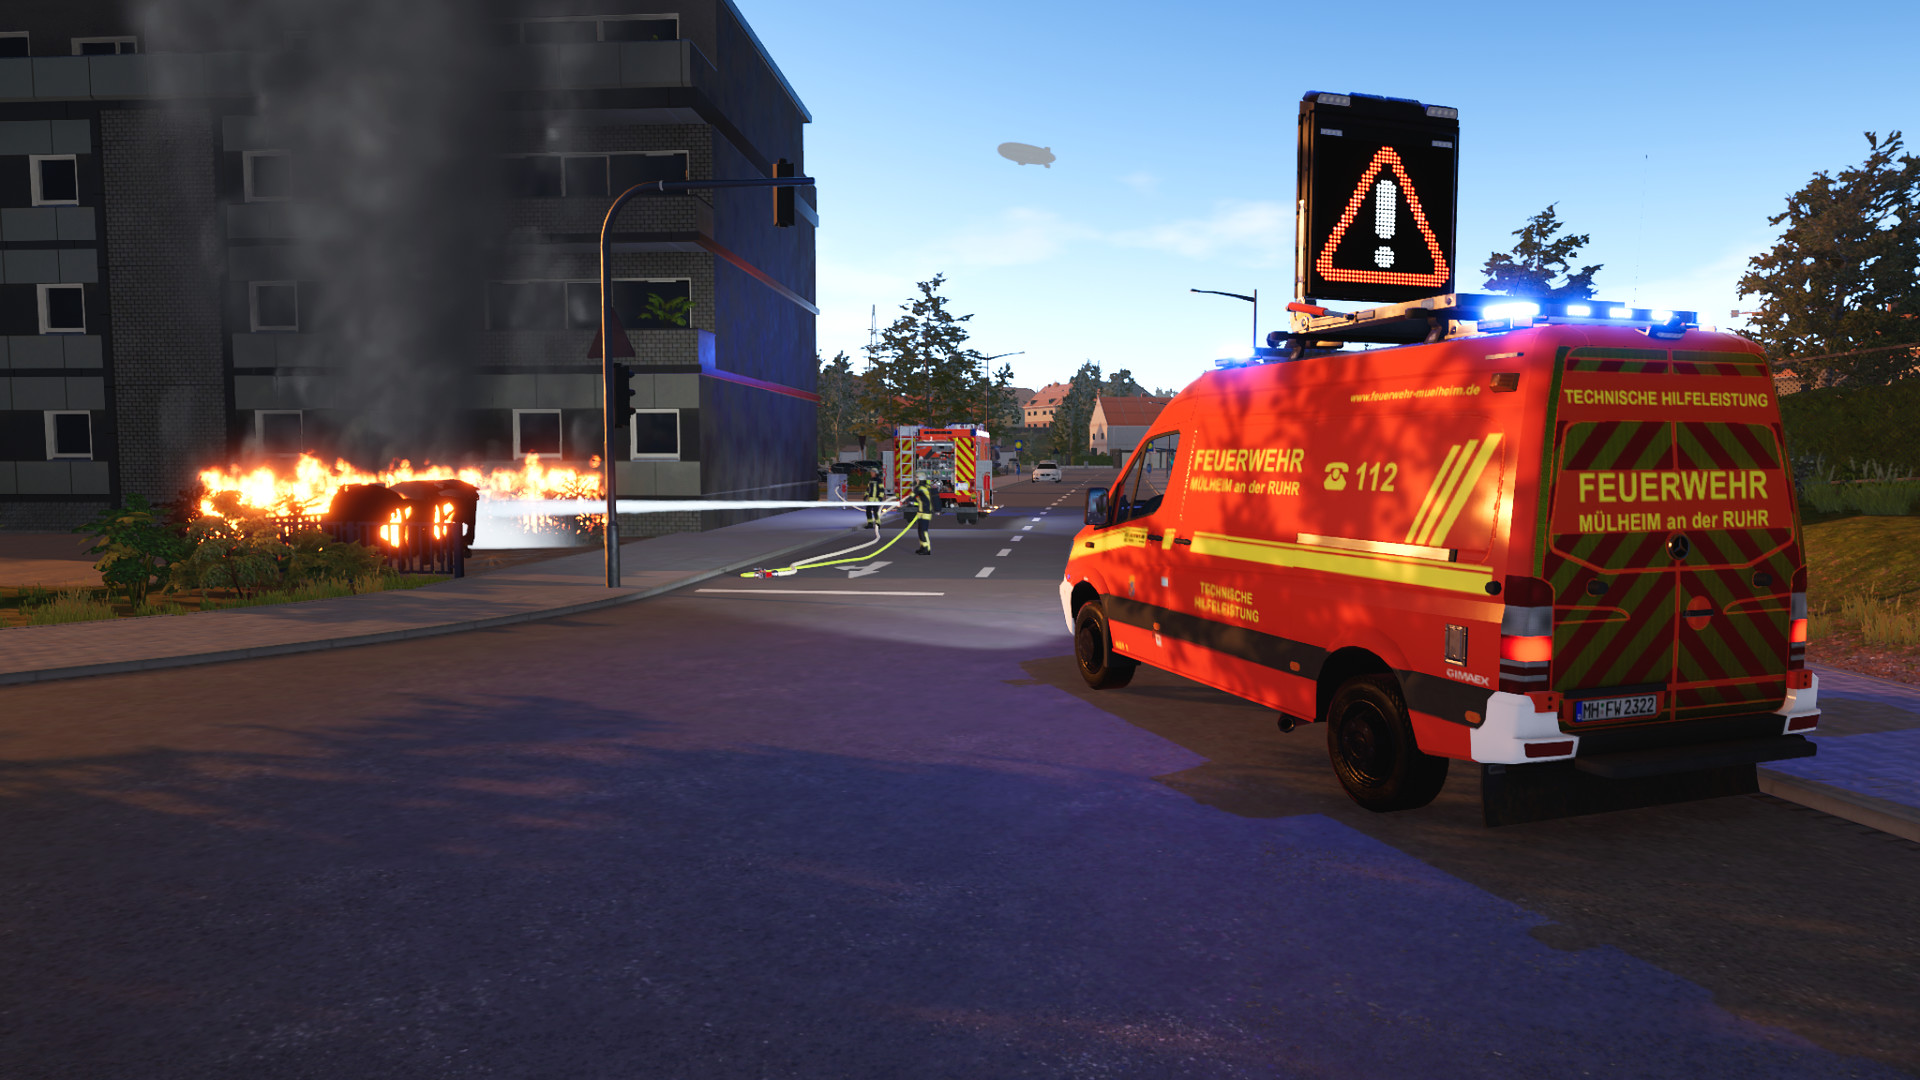 Emergency Call Steam 112 – 2 on Fire The Simulation Fighting